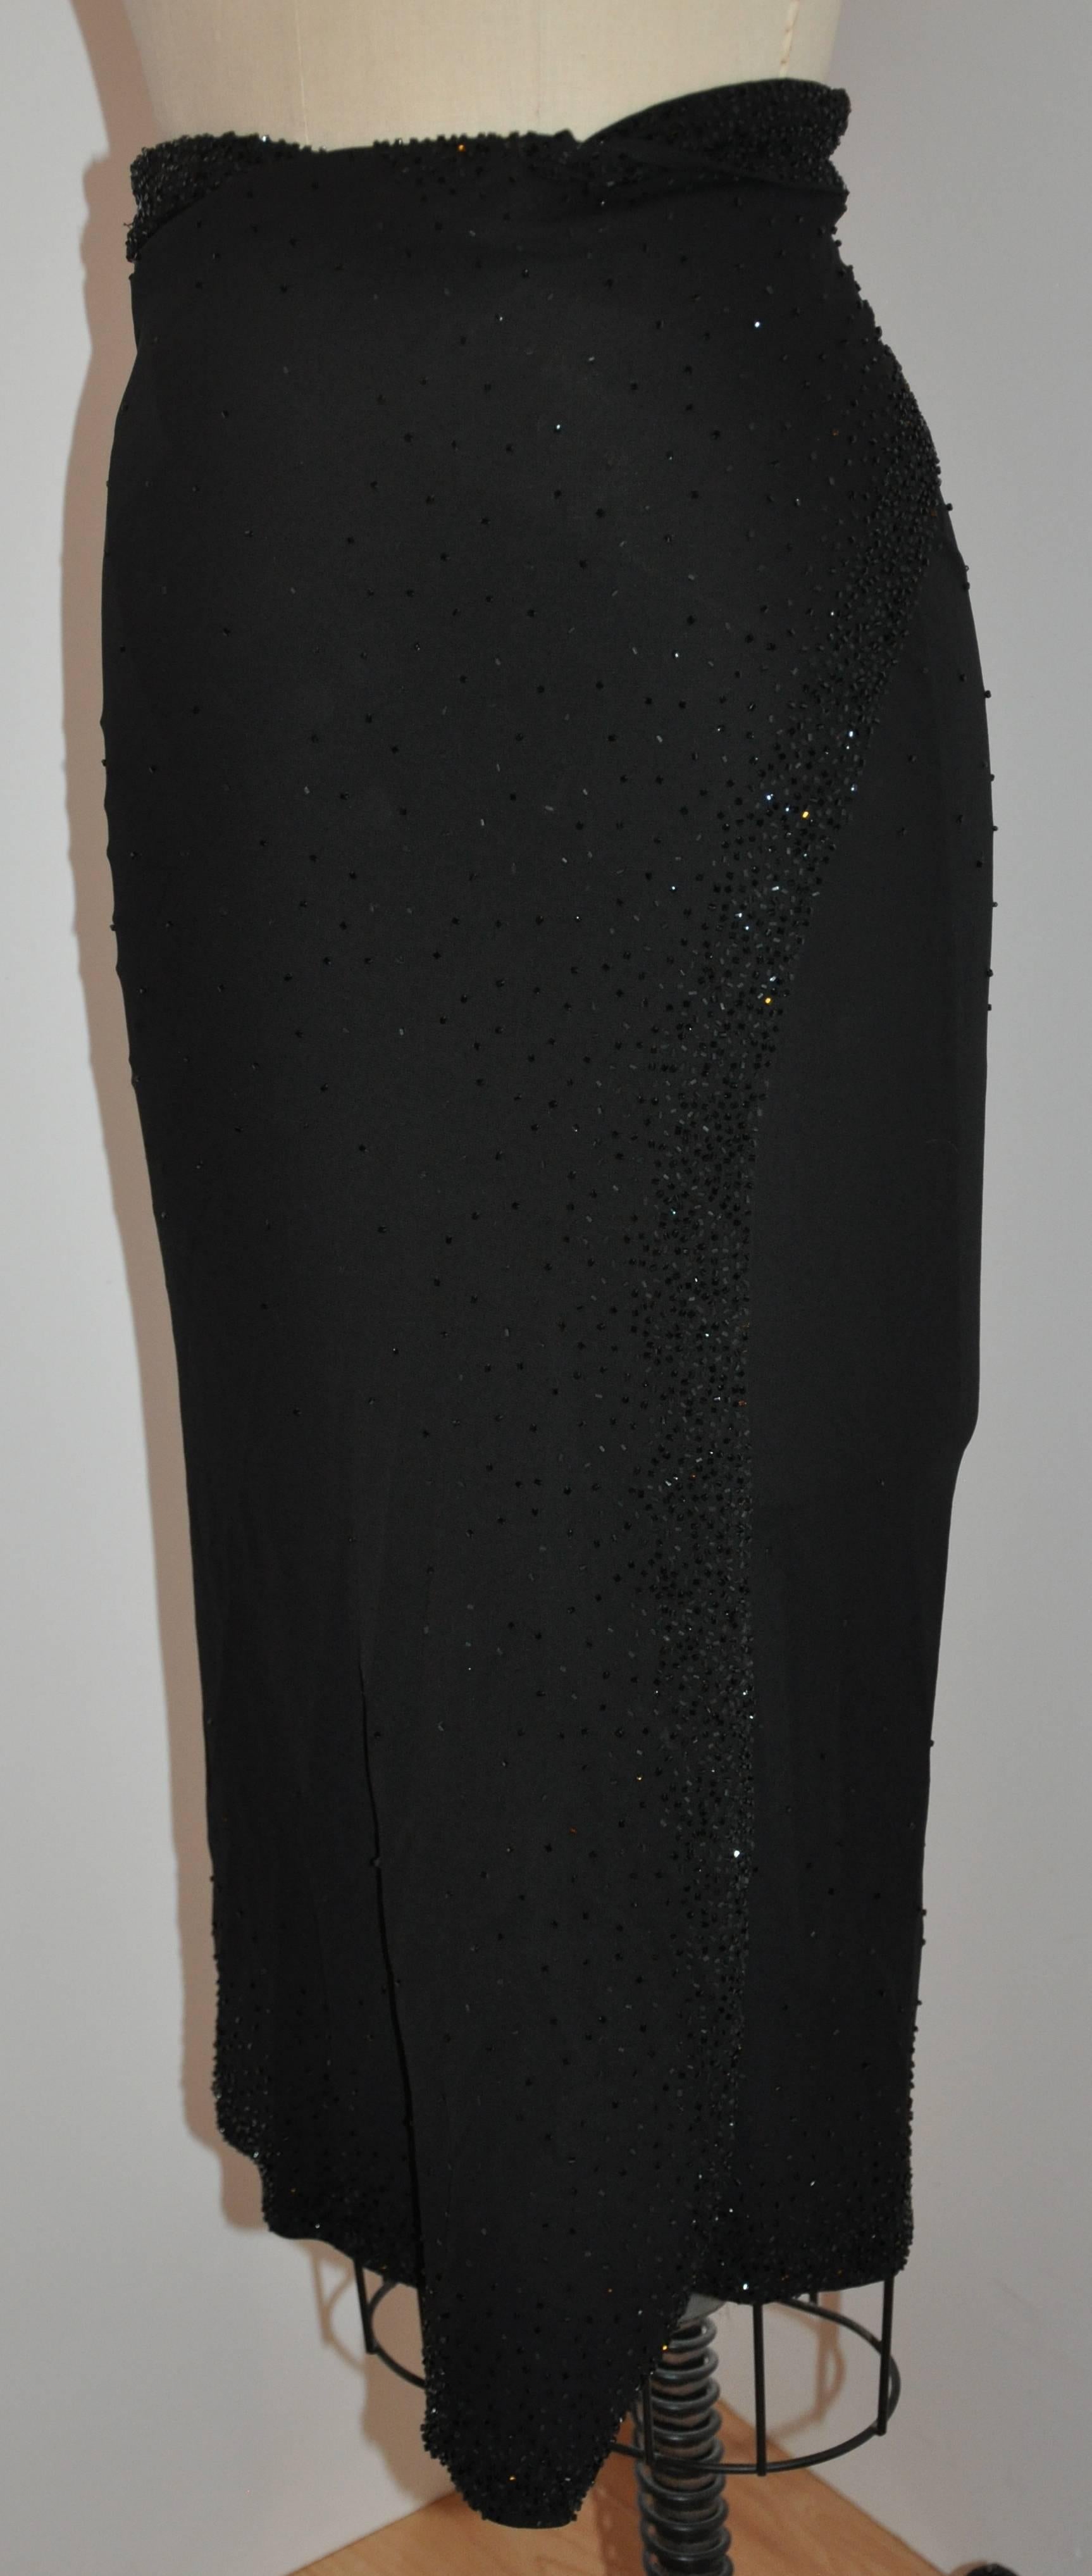           Donna Karan wonderfully elegant and timeless black silk jersey evening wrap skirt is delicately accented with micro seed bead embroidery scattered along the waist as well as along the edges in front. This evening skirt is simply elegant